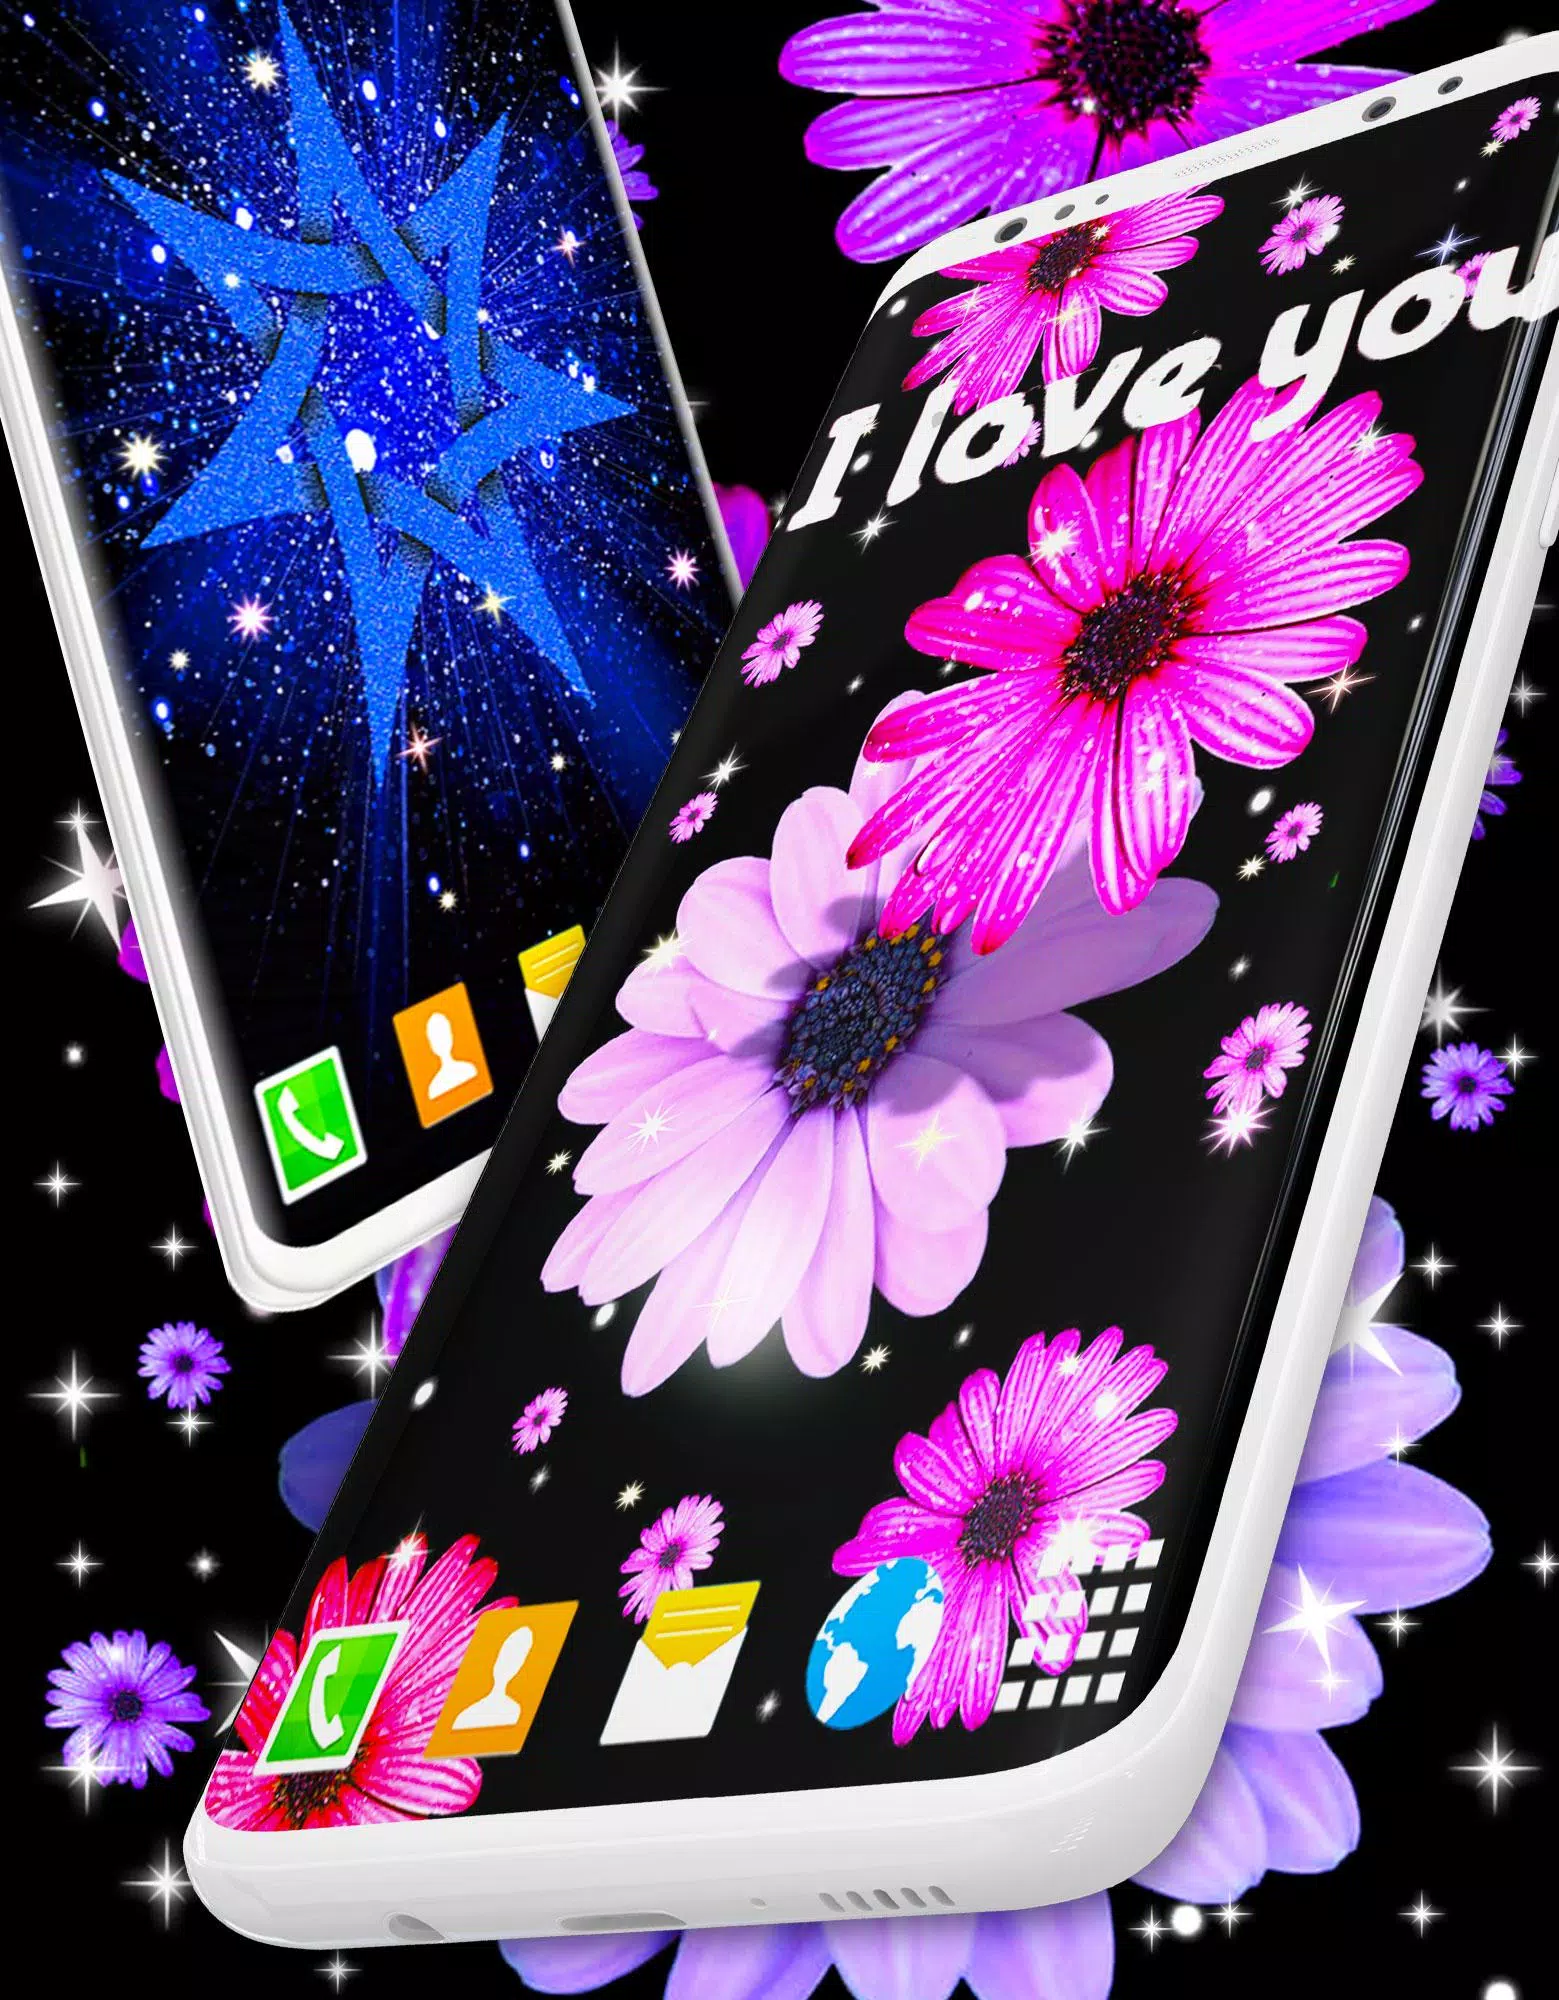 HD Wallpaper ❤️ Live Wallpapers for Galaxy J5 APK pour Android Télécharger